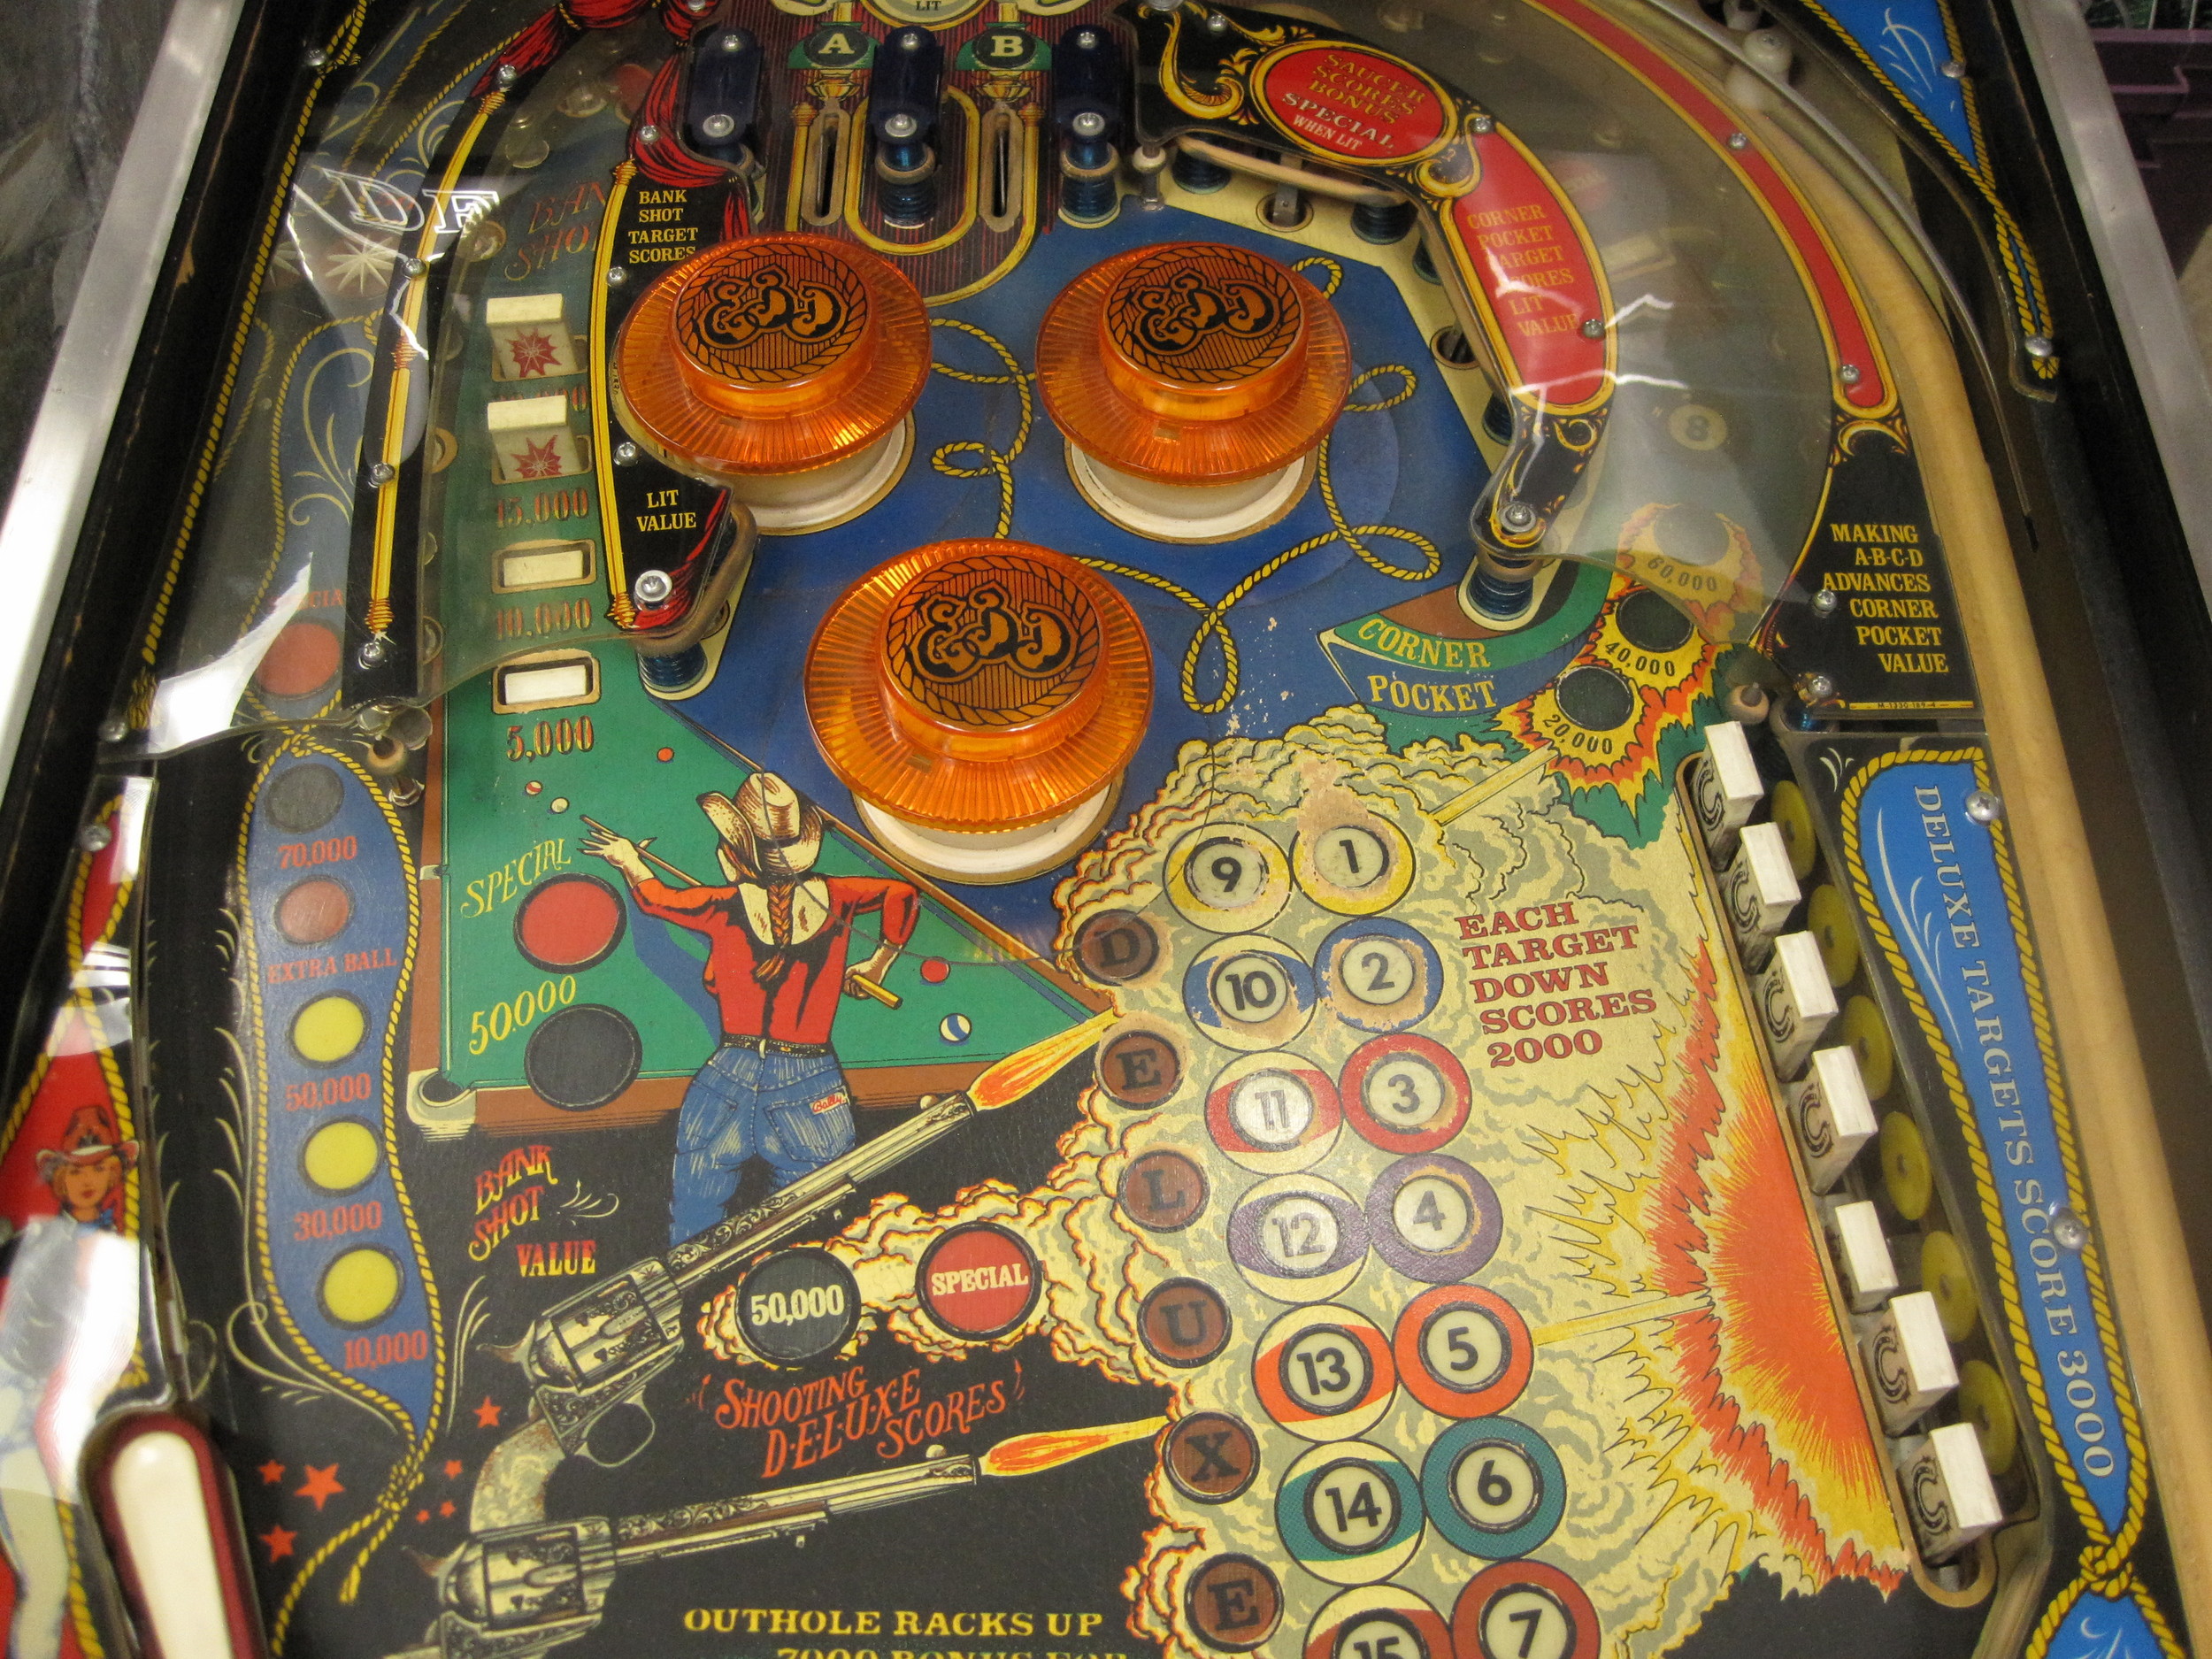 Middle Playfield (Before)